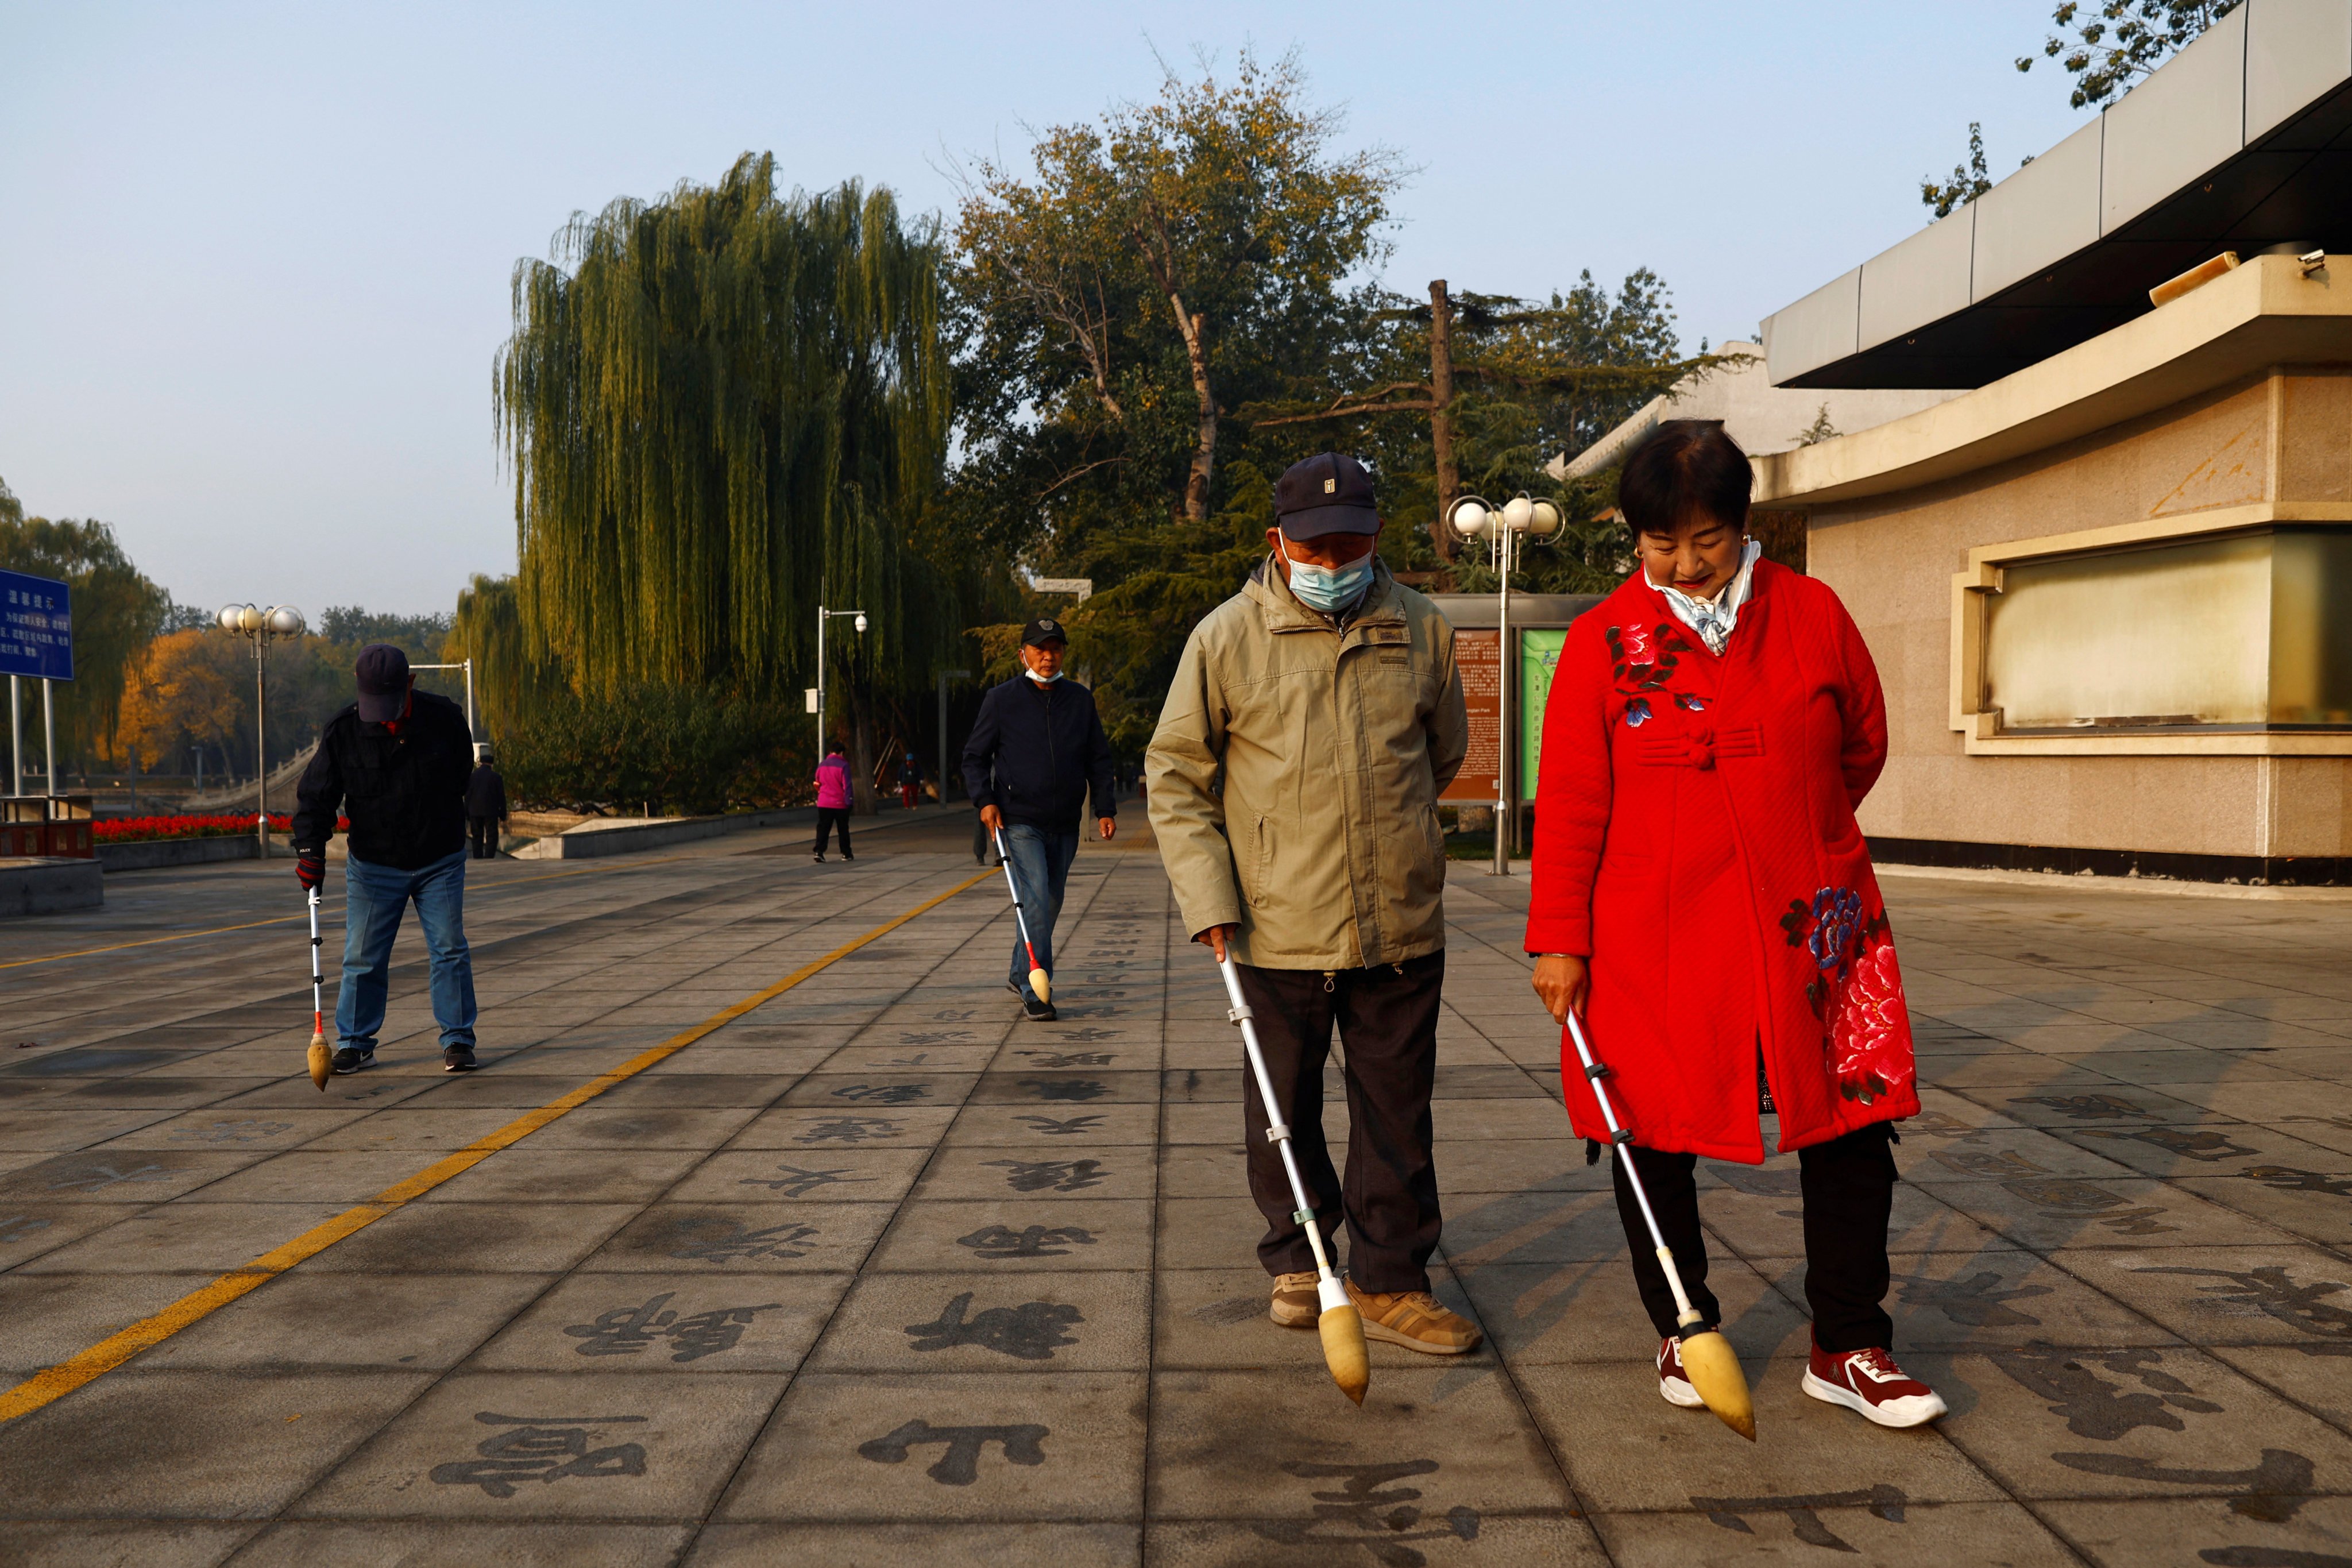 The sector of China’s economy catering to the elderly has seen massive expansion in recent years - and as the population ages, that growth is expected to be surpassed. Photo: Reuters